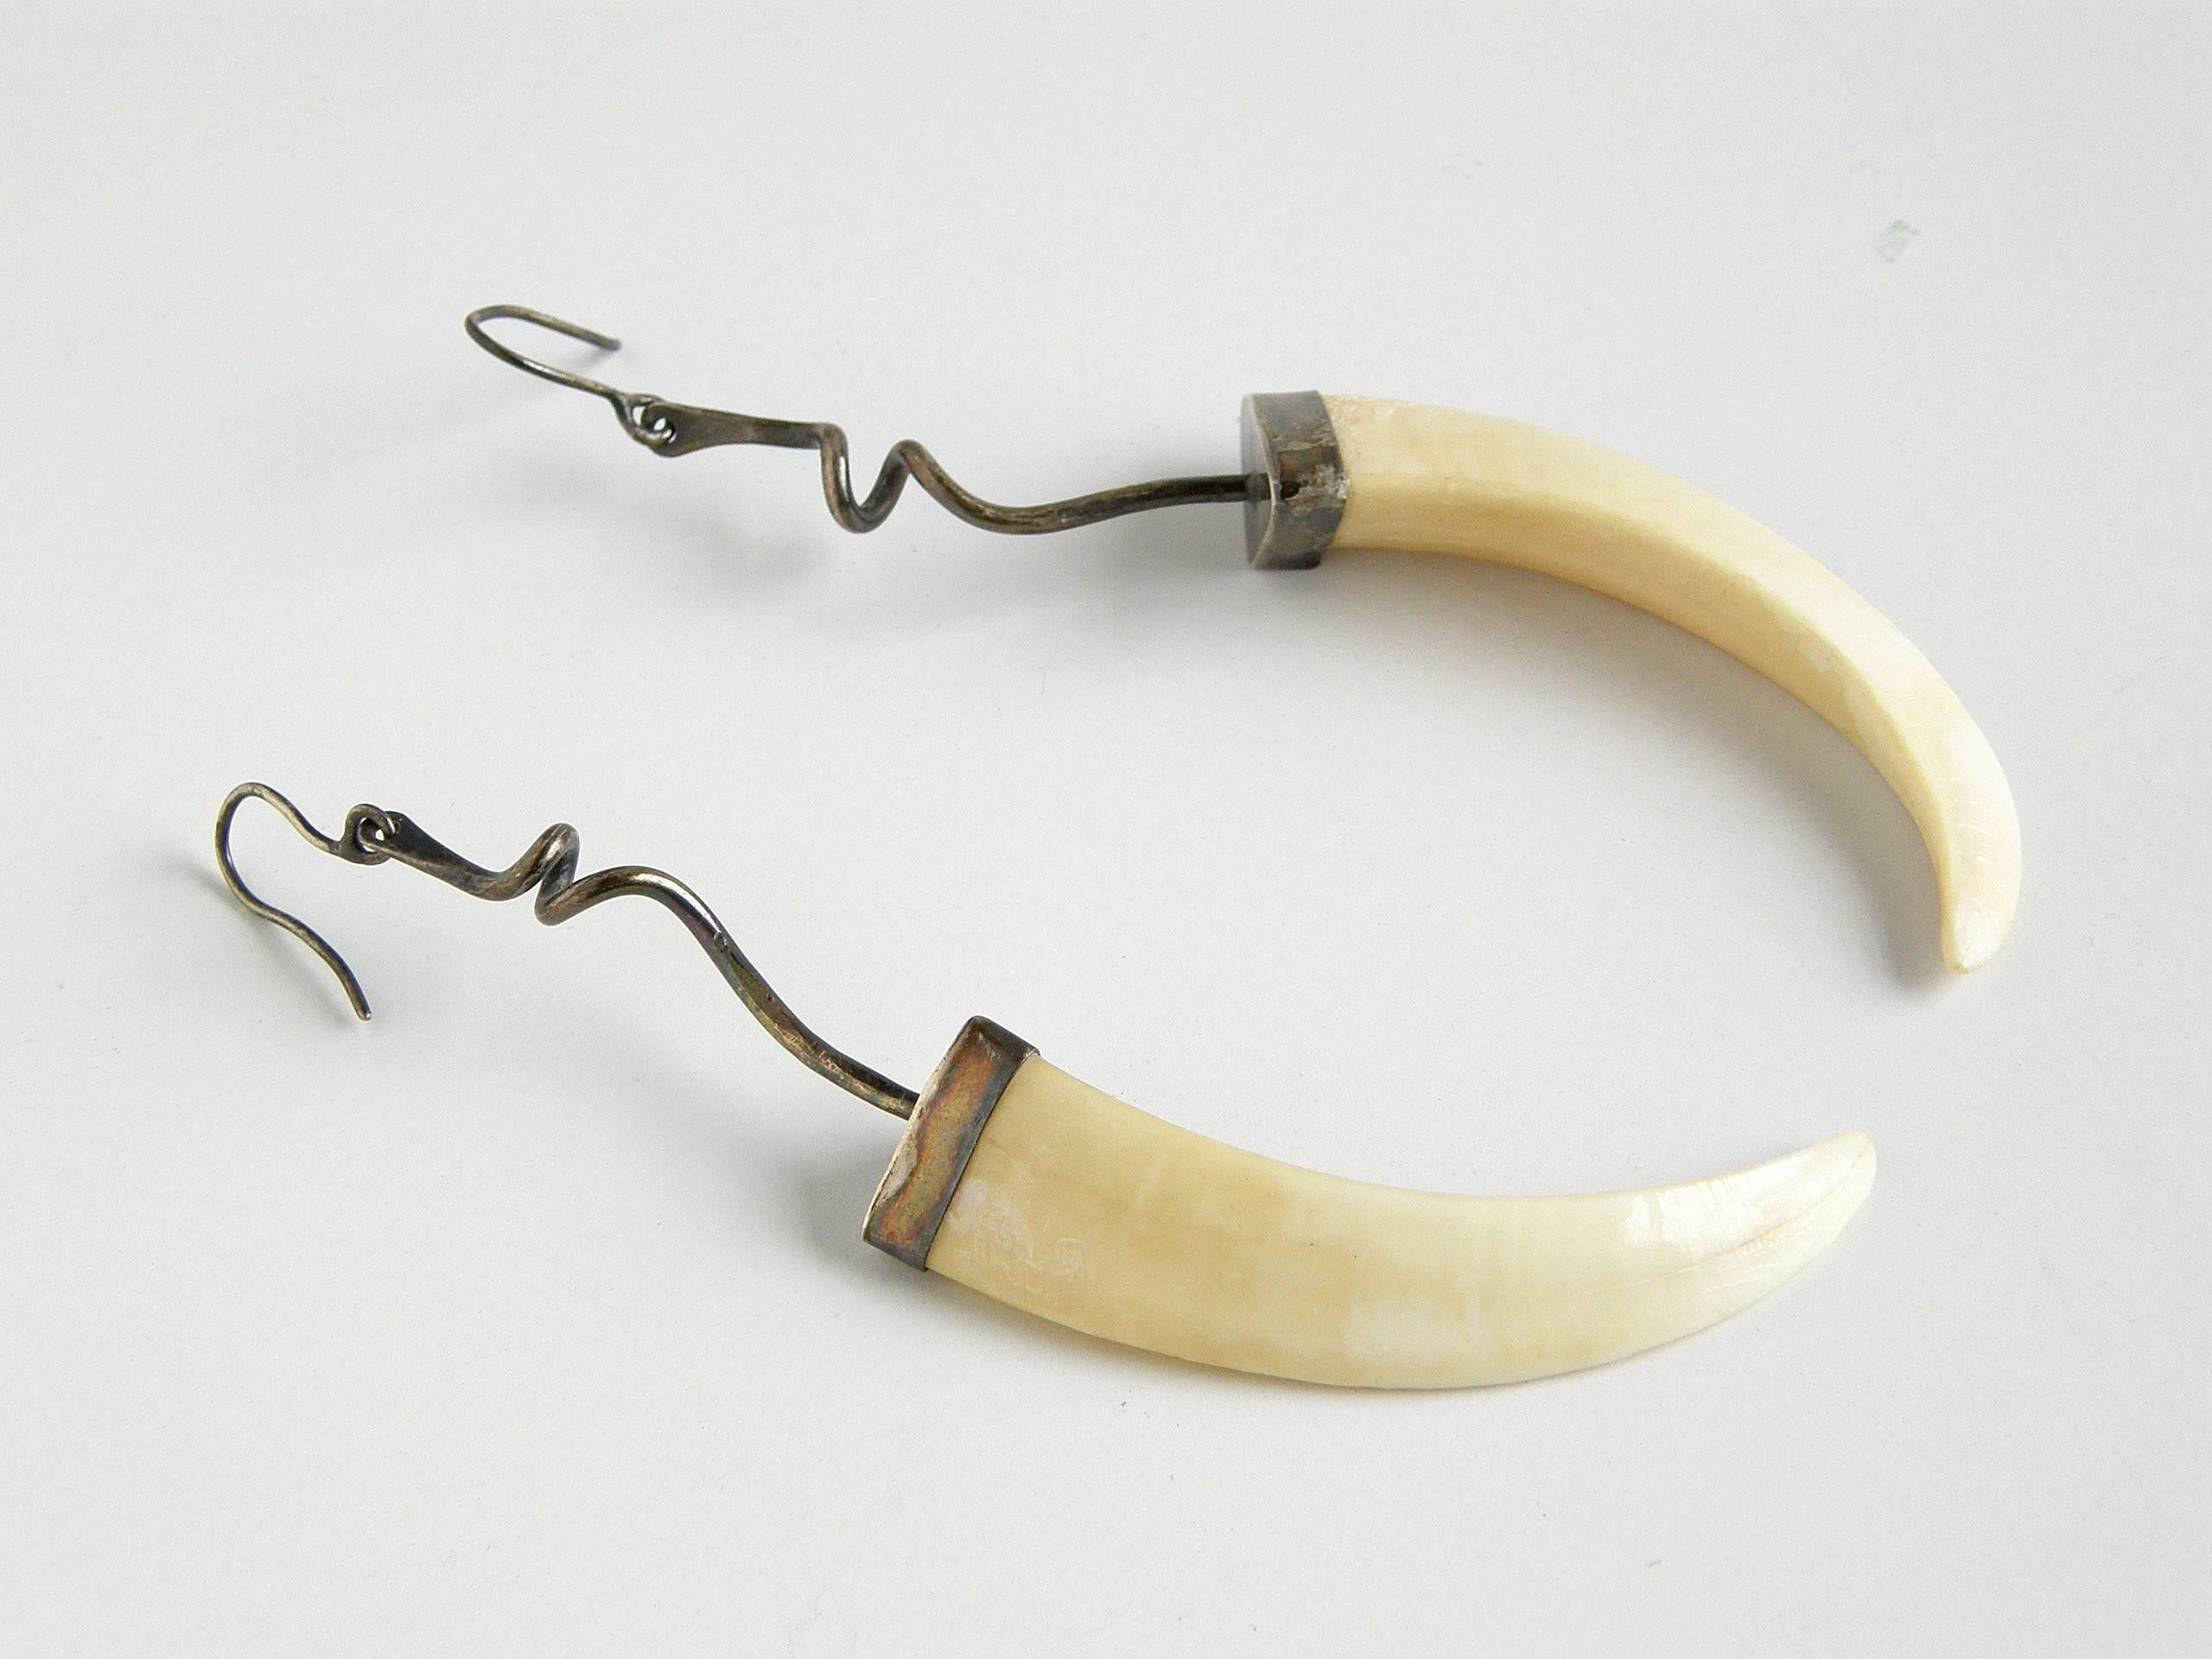 These dramatic earrings by Chicago jeweler Ted Drendel beautifully combine ancient and modern elements. The fierce looking boar tusks are countered by the whimsical, irregular coils from which they hang. Boar tusks have various significance in many